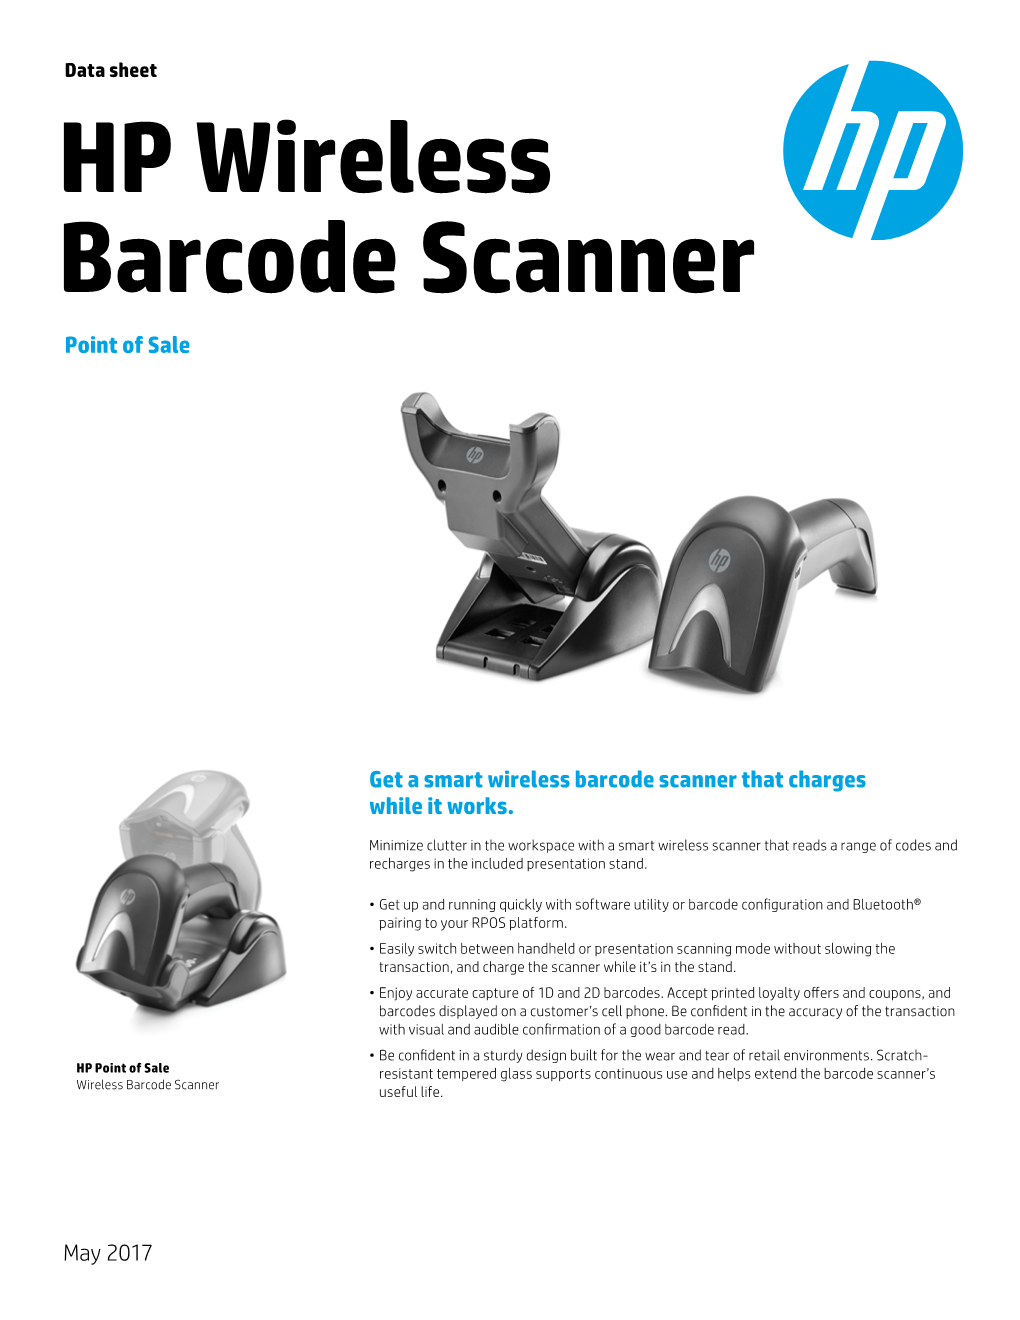 HP Wireless Barcode Scanner Point of Sale